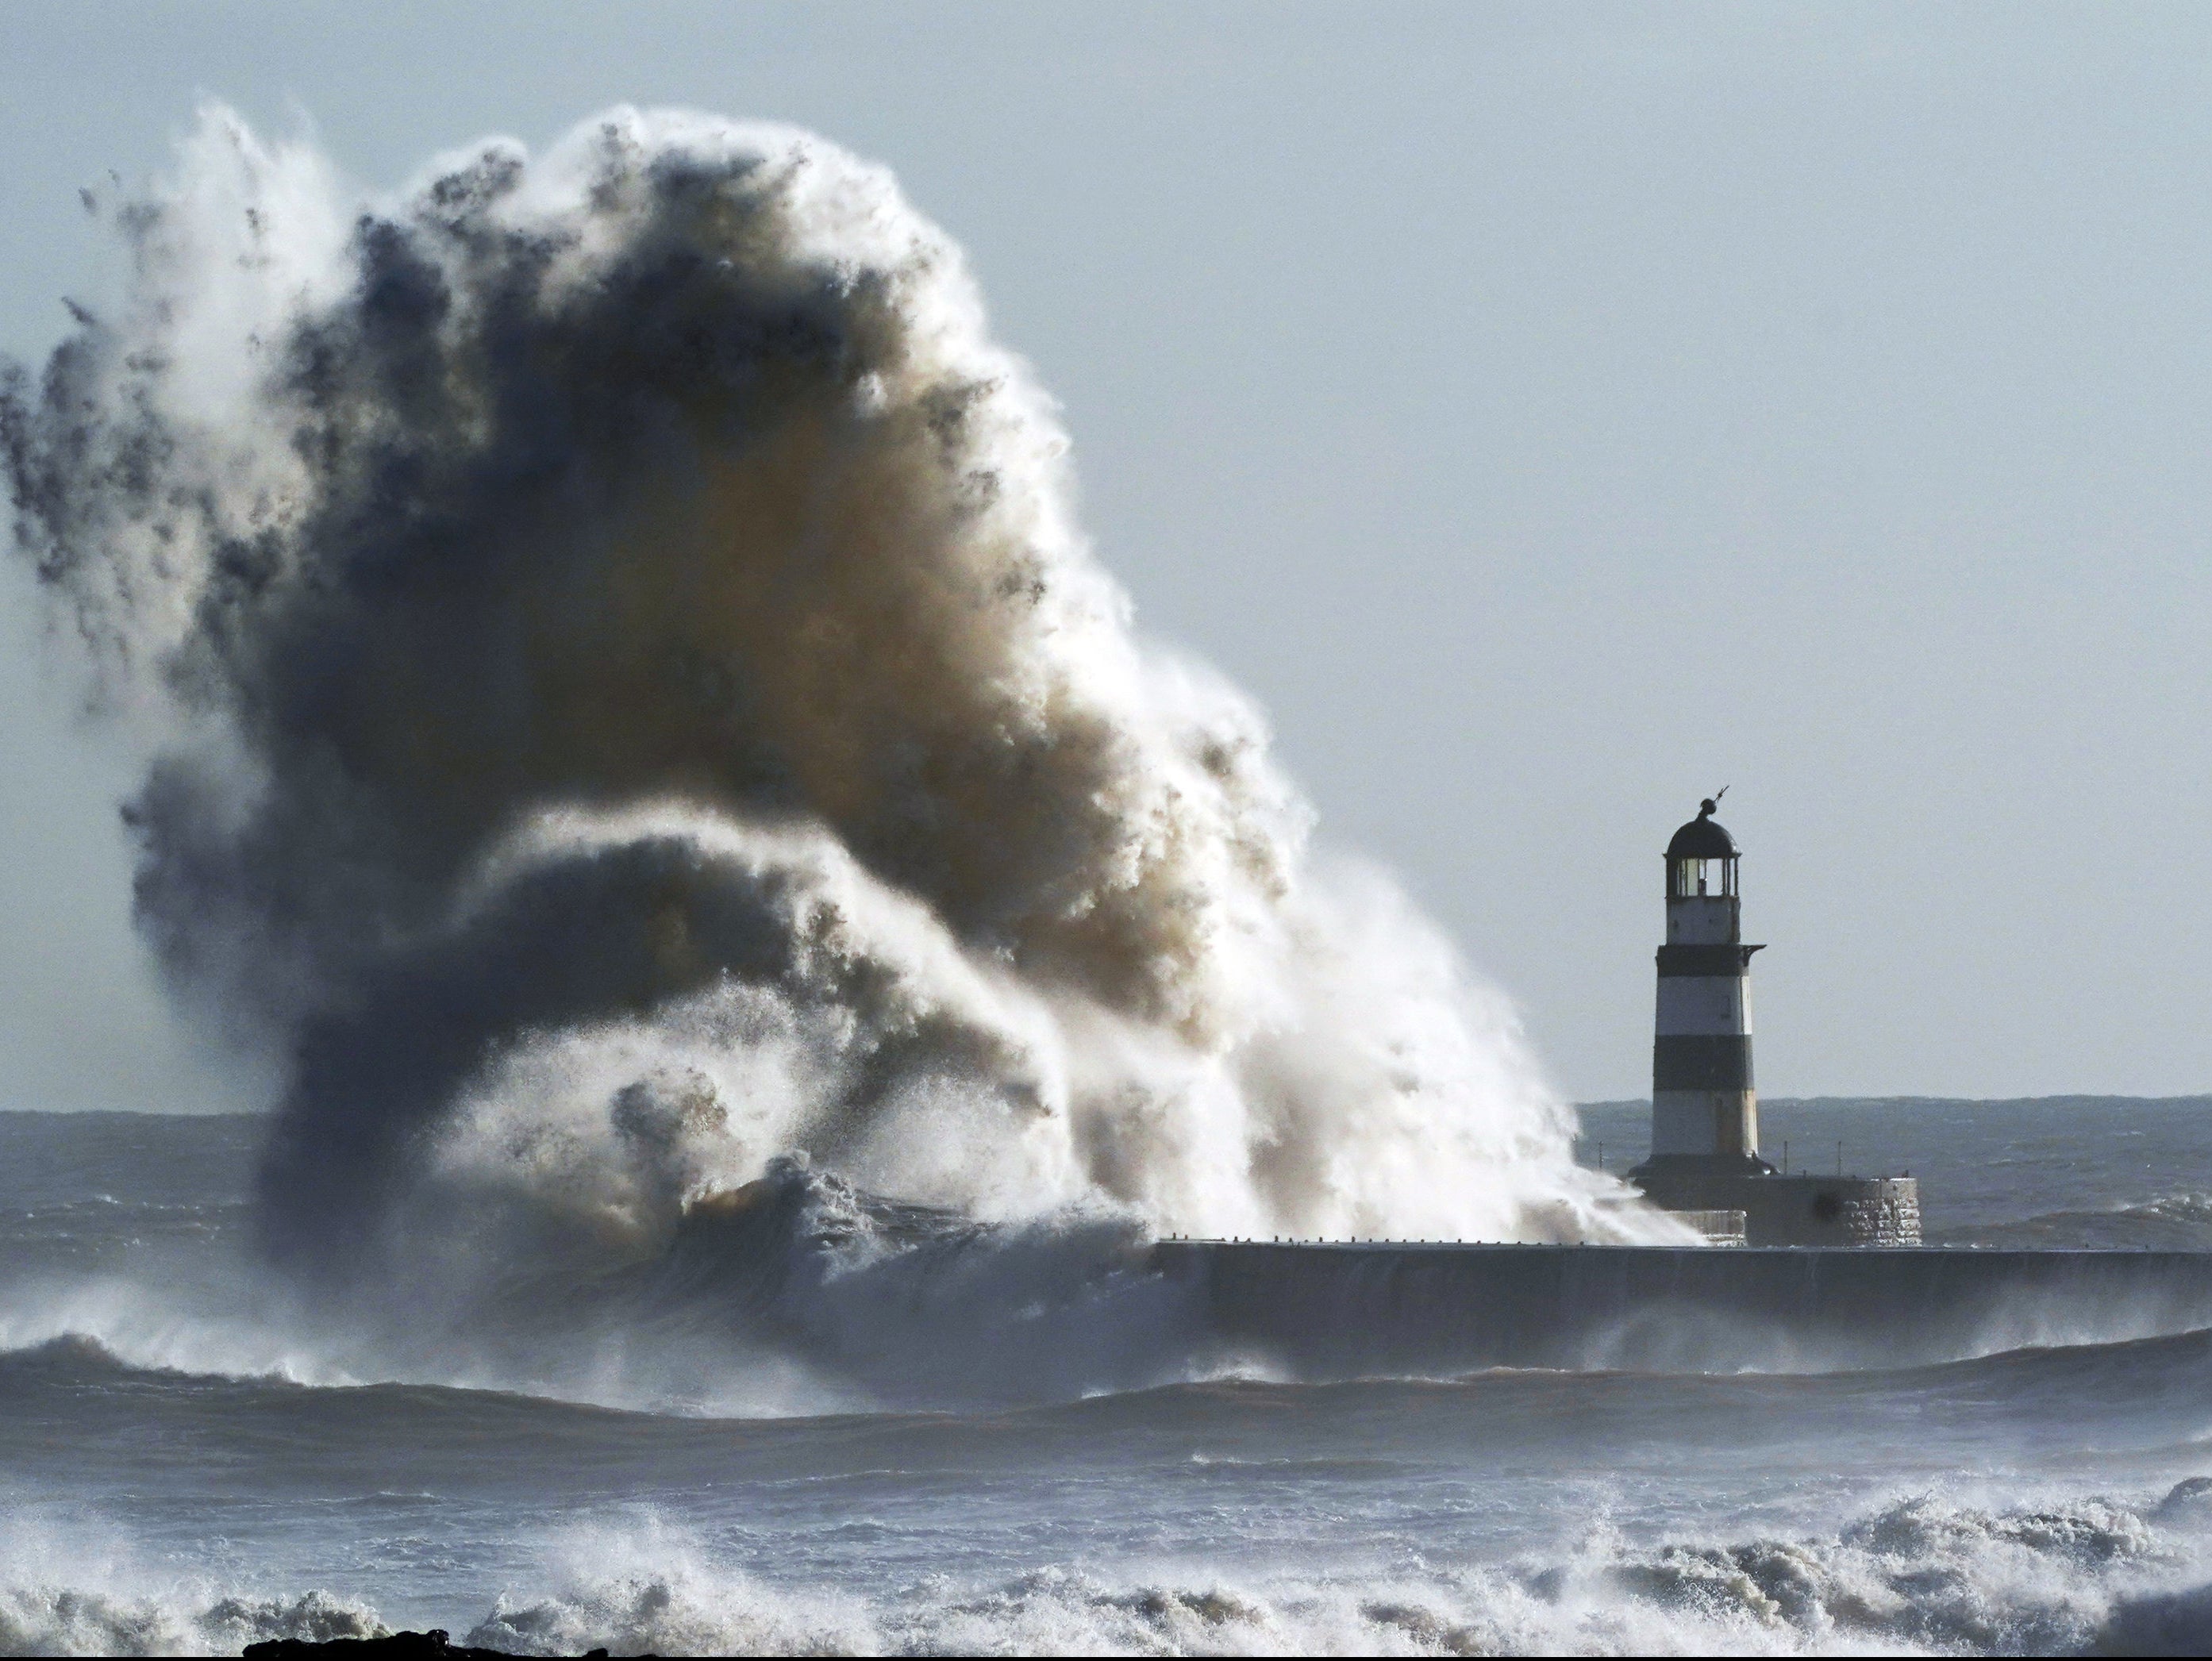 Storm Mathis is expected to impact parts of England on Friday